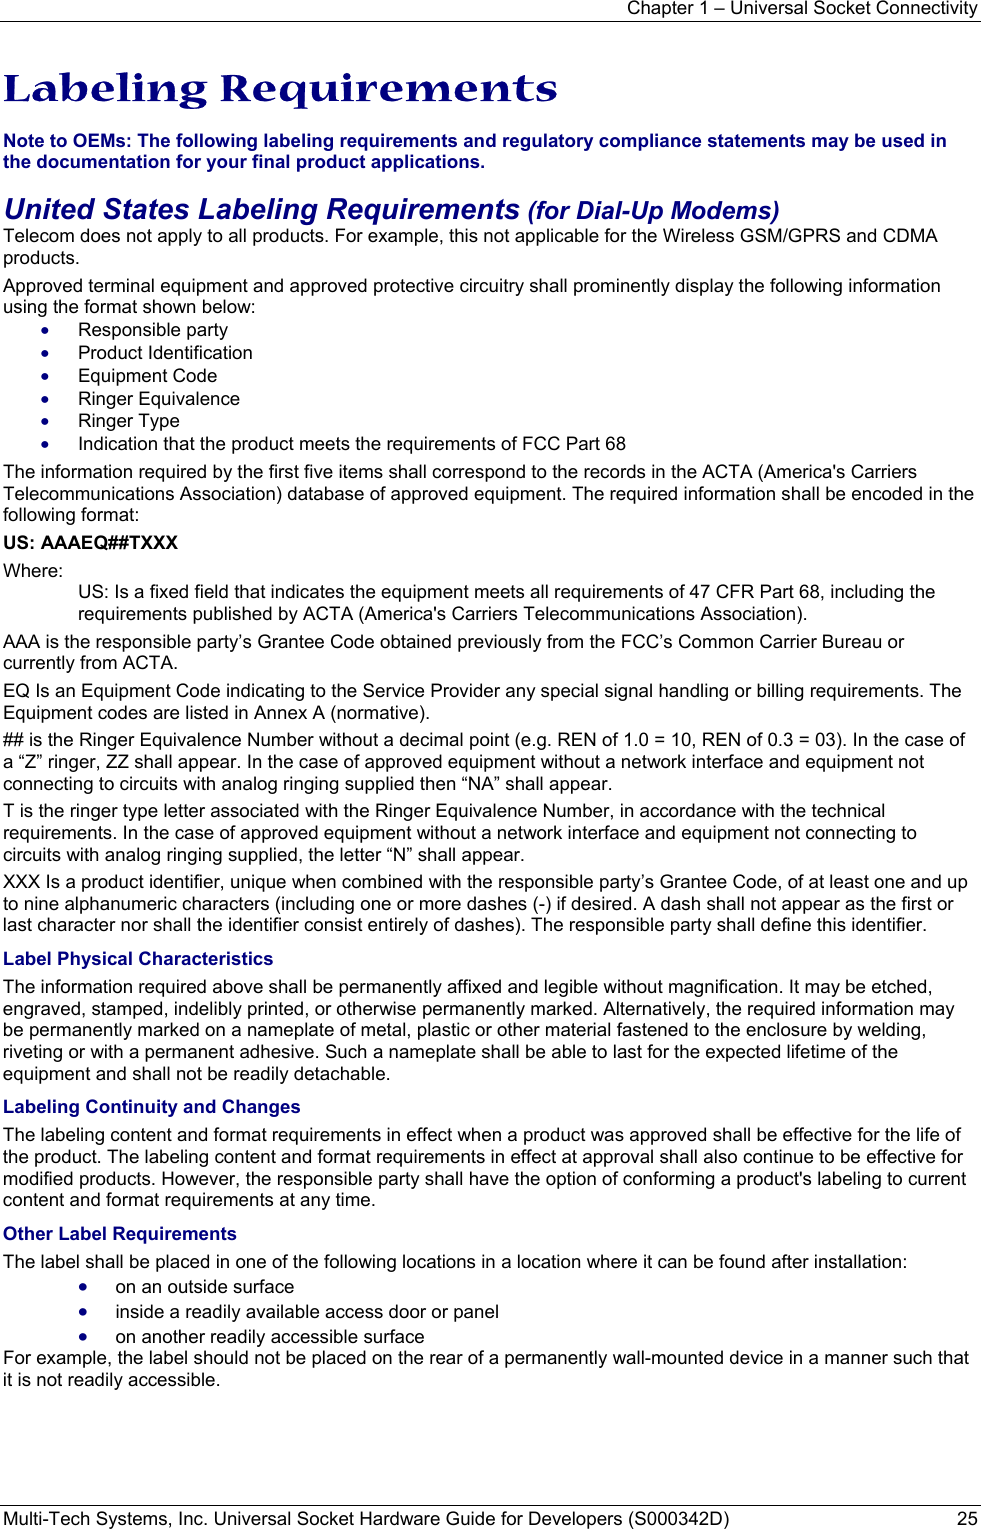 Chapter 1 – Universal Socket Connectivity Multi-Tech Systems, Inc. Universal Socket Hardware Guide for Developers (S000342D)  25  Labeling Requirements  Note to OEMs: The following labeling requirements and regulatory compliance statements may be used in the documentation for your final product applications. United States Labeling Requirements (for Dial-Up Modems) Telecom does not apply to all products. For example, this not applicable for the Wireless GSM/GPRS and CDMA products. Approved terminal equipment and approved protective circuitry shall prominently display the following information using the format shown below: • Responsible party • Product Identification • Equipment Code • Ringer Equivalence • Ringer Type • Indication that the product meets the requirements of FCC Part 68 The information required by the first five items shall correspond to the records in the ACTA (America&apos;s Carriers Telecommunications Association) database of approved equipment. The required information shall be encoded in the following format: US: AAAEQ##TXXX Where: US: Is a fixed field that indicates the equipment meets all requirements of 47 CFR Part 68, including the requirements published by ACTA (America&apos;s Carriers Telecommunications Association). AAA is the responsible party’s Grantee Code obtained previously from the FCC’s Common Carrier Bureau or currently from ACTA. EQ Is an Equipment Code indicating to the Service Provider any special signal handling or billing requirements. The Equipment codes are listed in Annex A (normative). ## is the Ringer Equivalence Number without a decimal point (e.g. REN of 1.0 = 10, REN of 0.3 = 03). In the case of a “Z” ringer, ZZ shall appear. In the case of approved equipment without a network interface and equipment not connecting to circuits with analog ringing supplied then “NA” shall appear. T is the ringer type letter associated with the Ringer Equivalence Number, in accordance with the technical requirements. In the case of approved equipment without a network interface and equipment not connecting to circuits with analog ringing supplied, the letter “N” shall appear. XXX Is a product identifier, unique when combined with the responsible party’s Grantee Code, of at least one and up to nine alphanumeric characters (including one or more dashes (-) if desired. A dash shall not appear as the first or last character nor shall the identifier consist entirely of dashes). The responsible party shall define this identifier. Label Physical Characteristics The information required above shall be permanently affixed and legible without magnification. It may be etched, engraved, stamped, indelibly printed, or otherwise permanently marked. Alternatively, the required information may be permanently marked on a nameplate of metal, plastic or other material fastened to the enclosure by welding, riveting or with a permanent adhesive. Such a nameplate shall be able to last for the expected lifetime of the equipment and shall not be readily detachable. Labeling Continuity and Changes The labeling content and format requirements in effect when a product was approved shall be effective for the life of the product. The labeling content and format requirements in effect at approval shall also continue to be effective for modified products. However, the responsible party shall have the option of conforming a product&apos;s labeling to current content and format requirements at any time. Other Label Requirements The label shall be placed in one of the following locations in a location where it can be found after installation: • on an outside surface • inside a readily available access door or panel • on another readily accessible surface For example, the label should not be placed on the rear of a permanently wall-mounted device in a manner such that it is not readily accessible. 